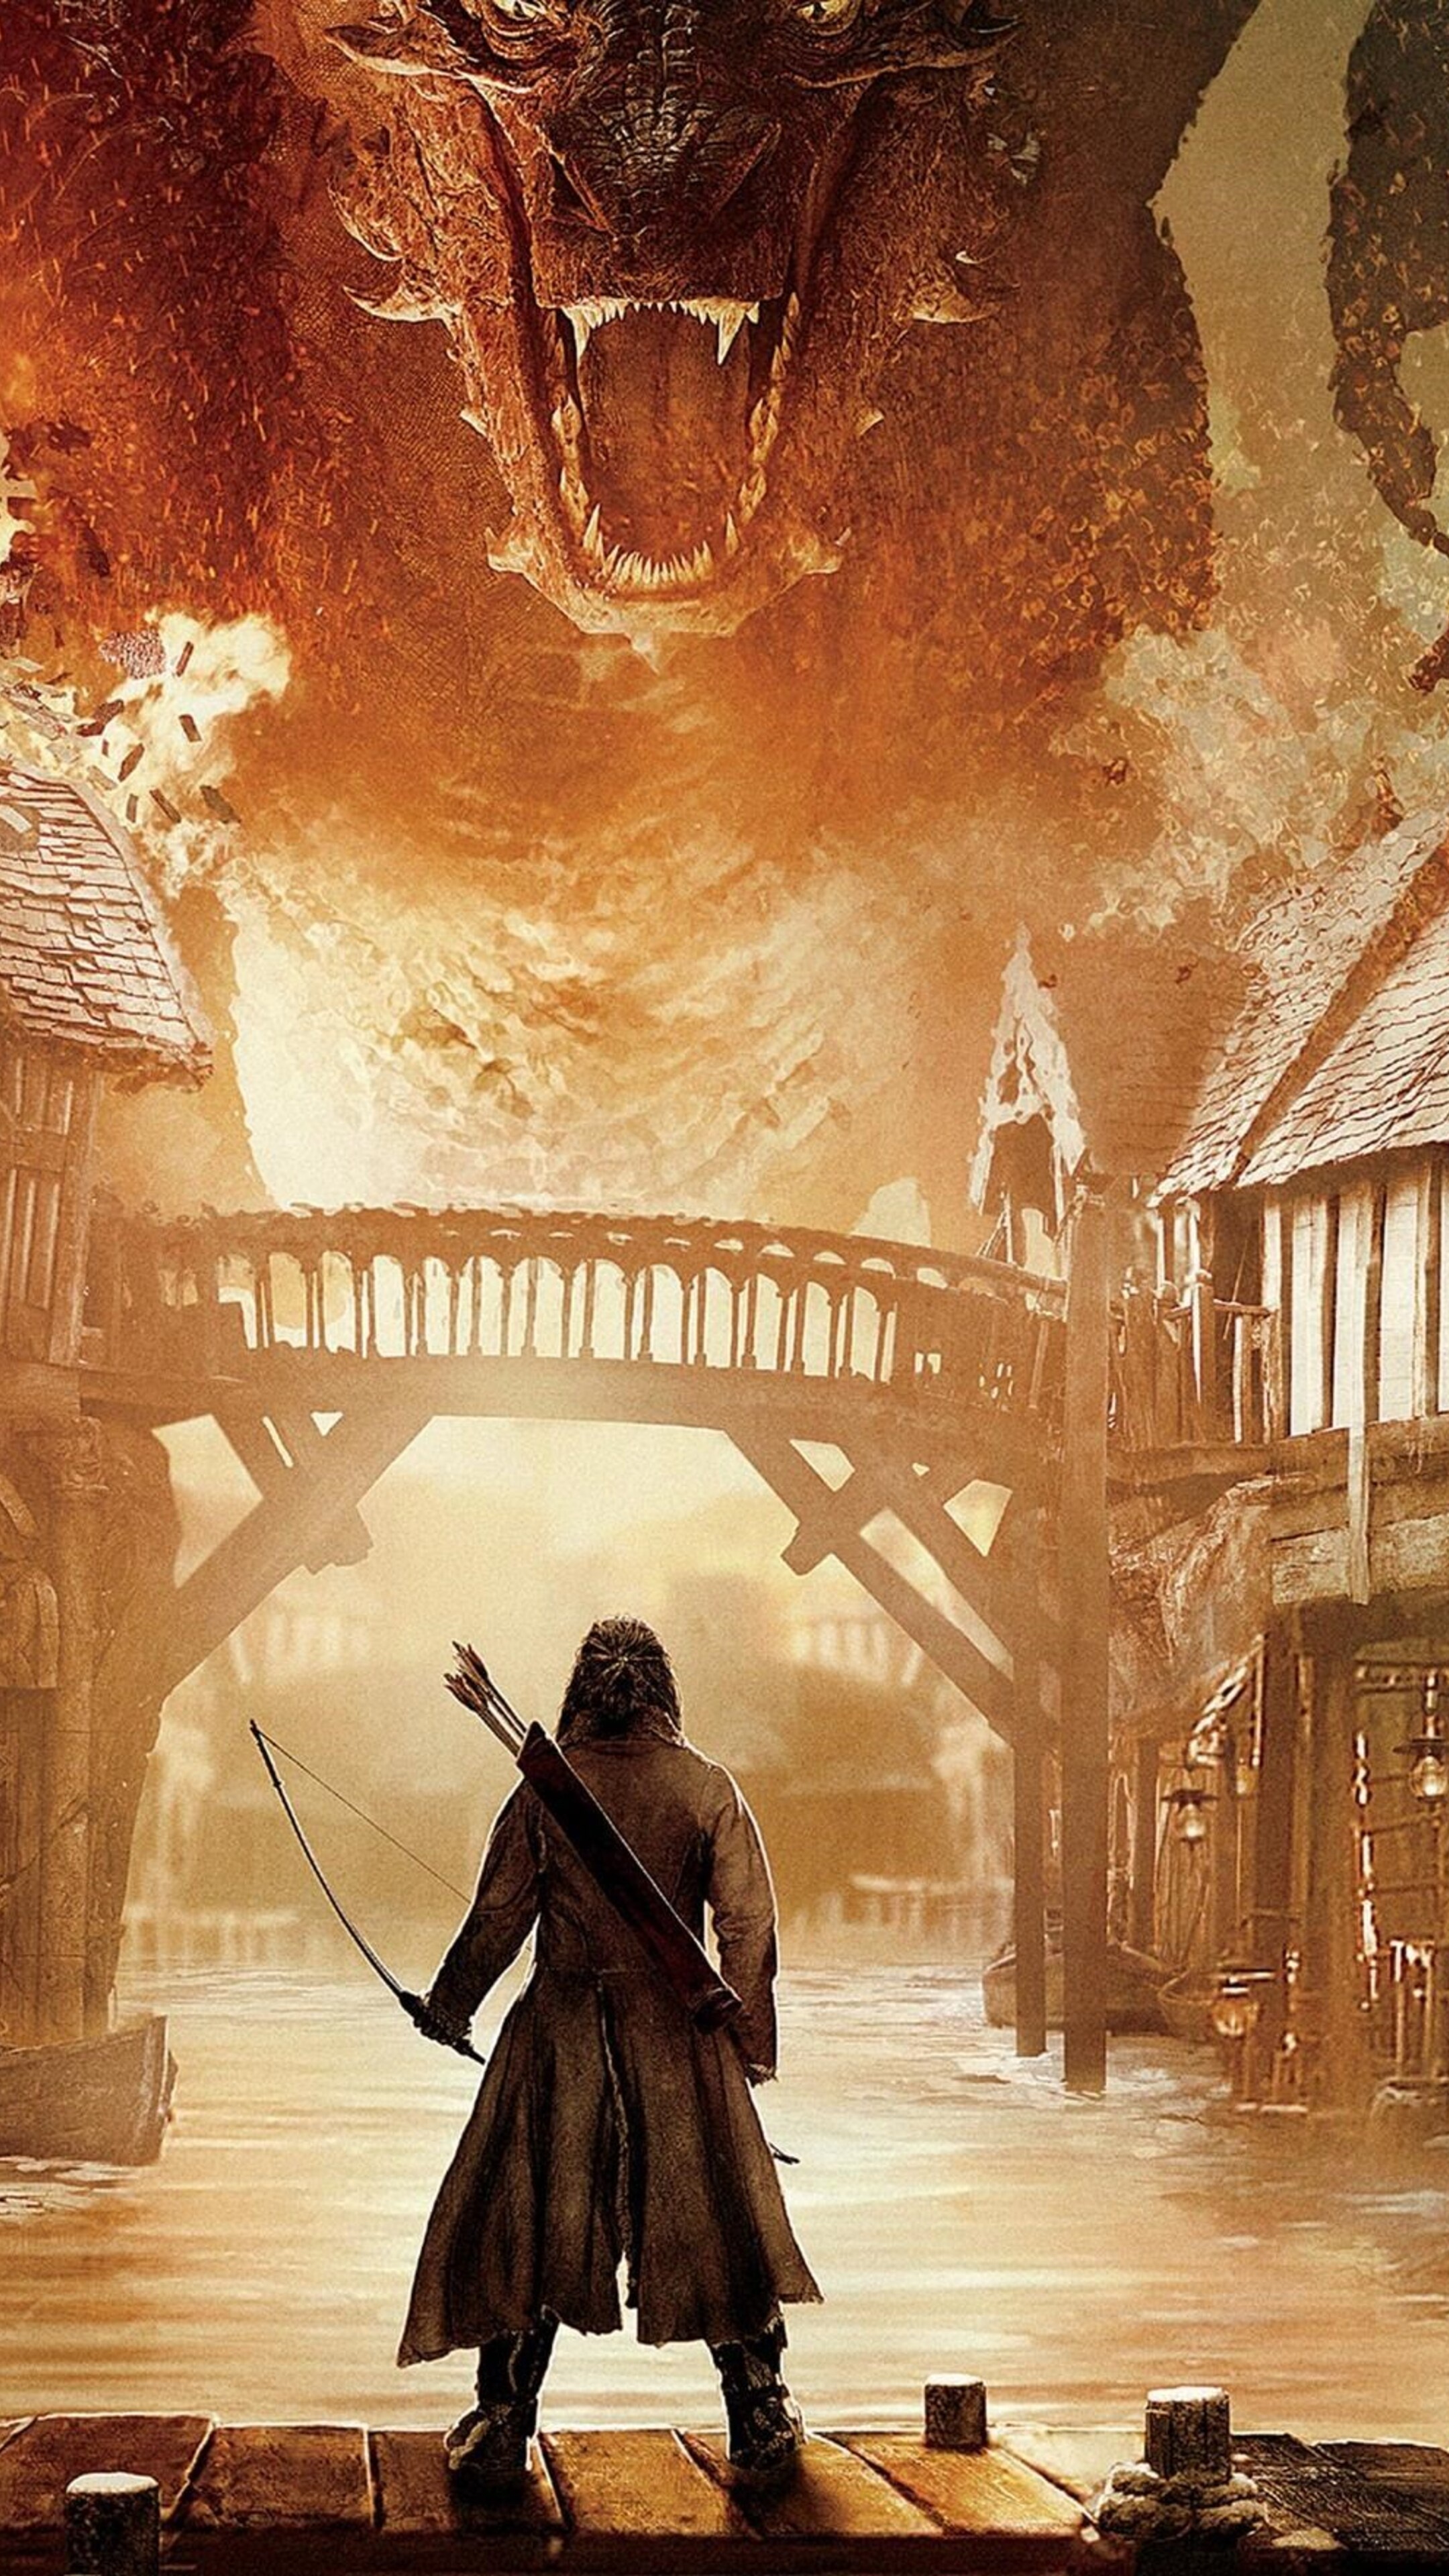 The Hobbit (Movie): The film's story concludes the adventure of Bilbo Baggins and Thorin Oakenshield's company of dwarves. 2160x3840 4K Background.